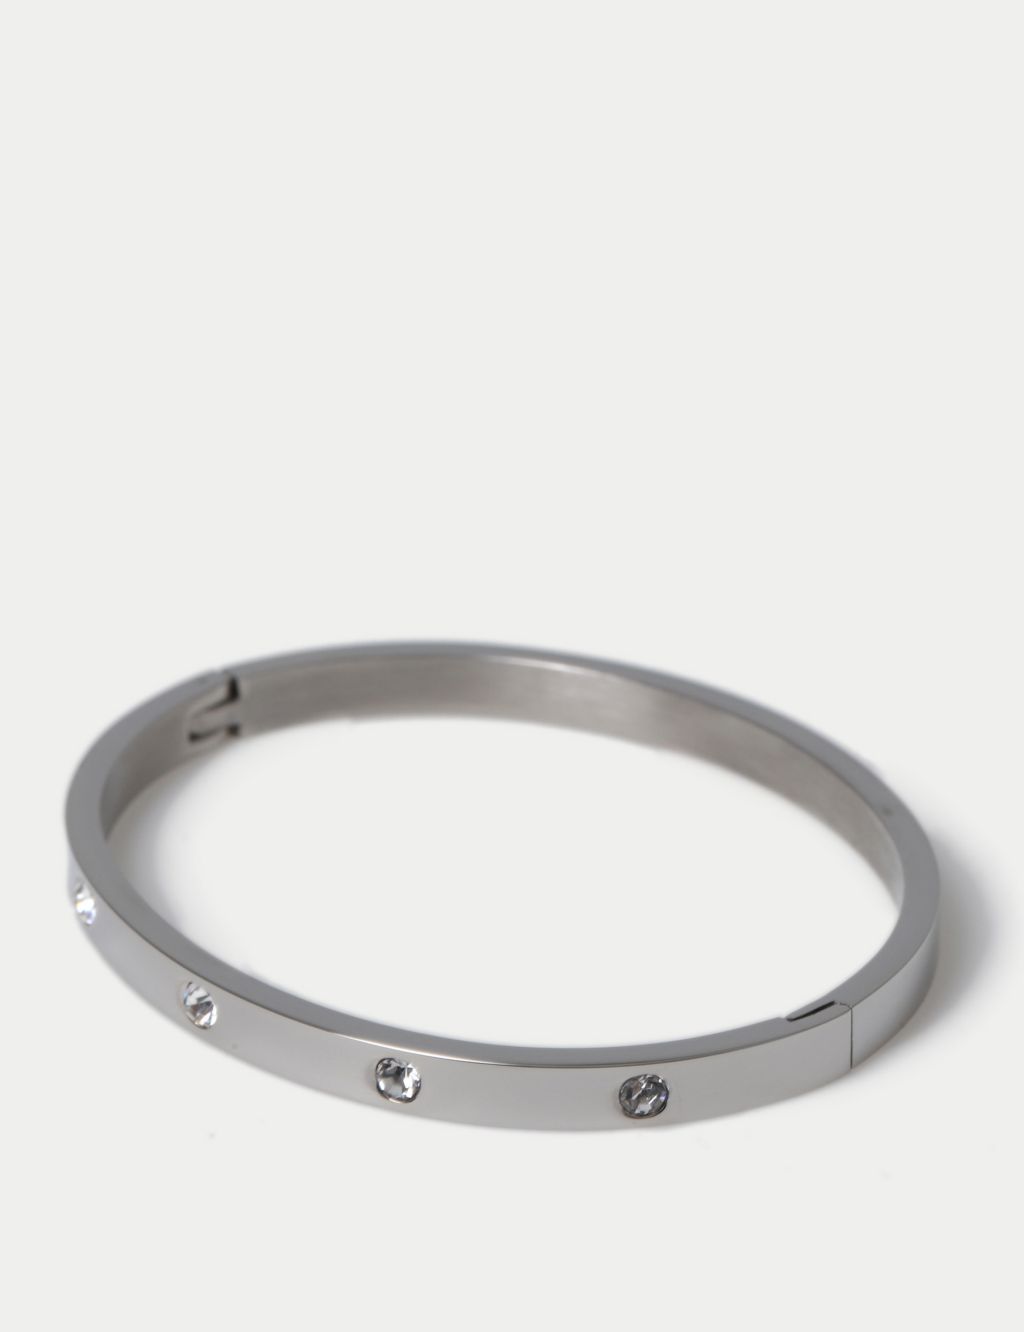 Autograph Waterproof Stainless Steel Bangle